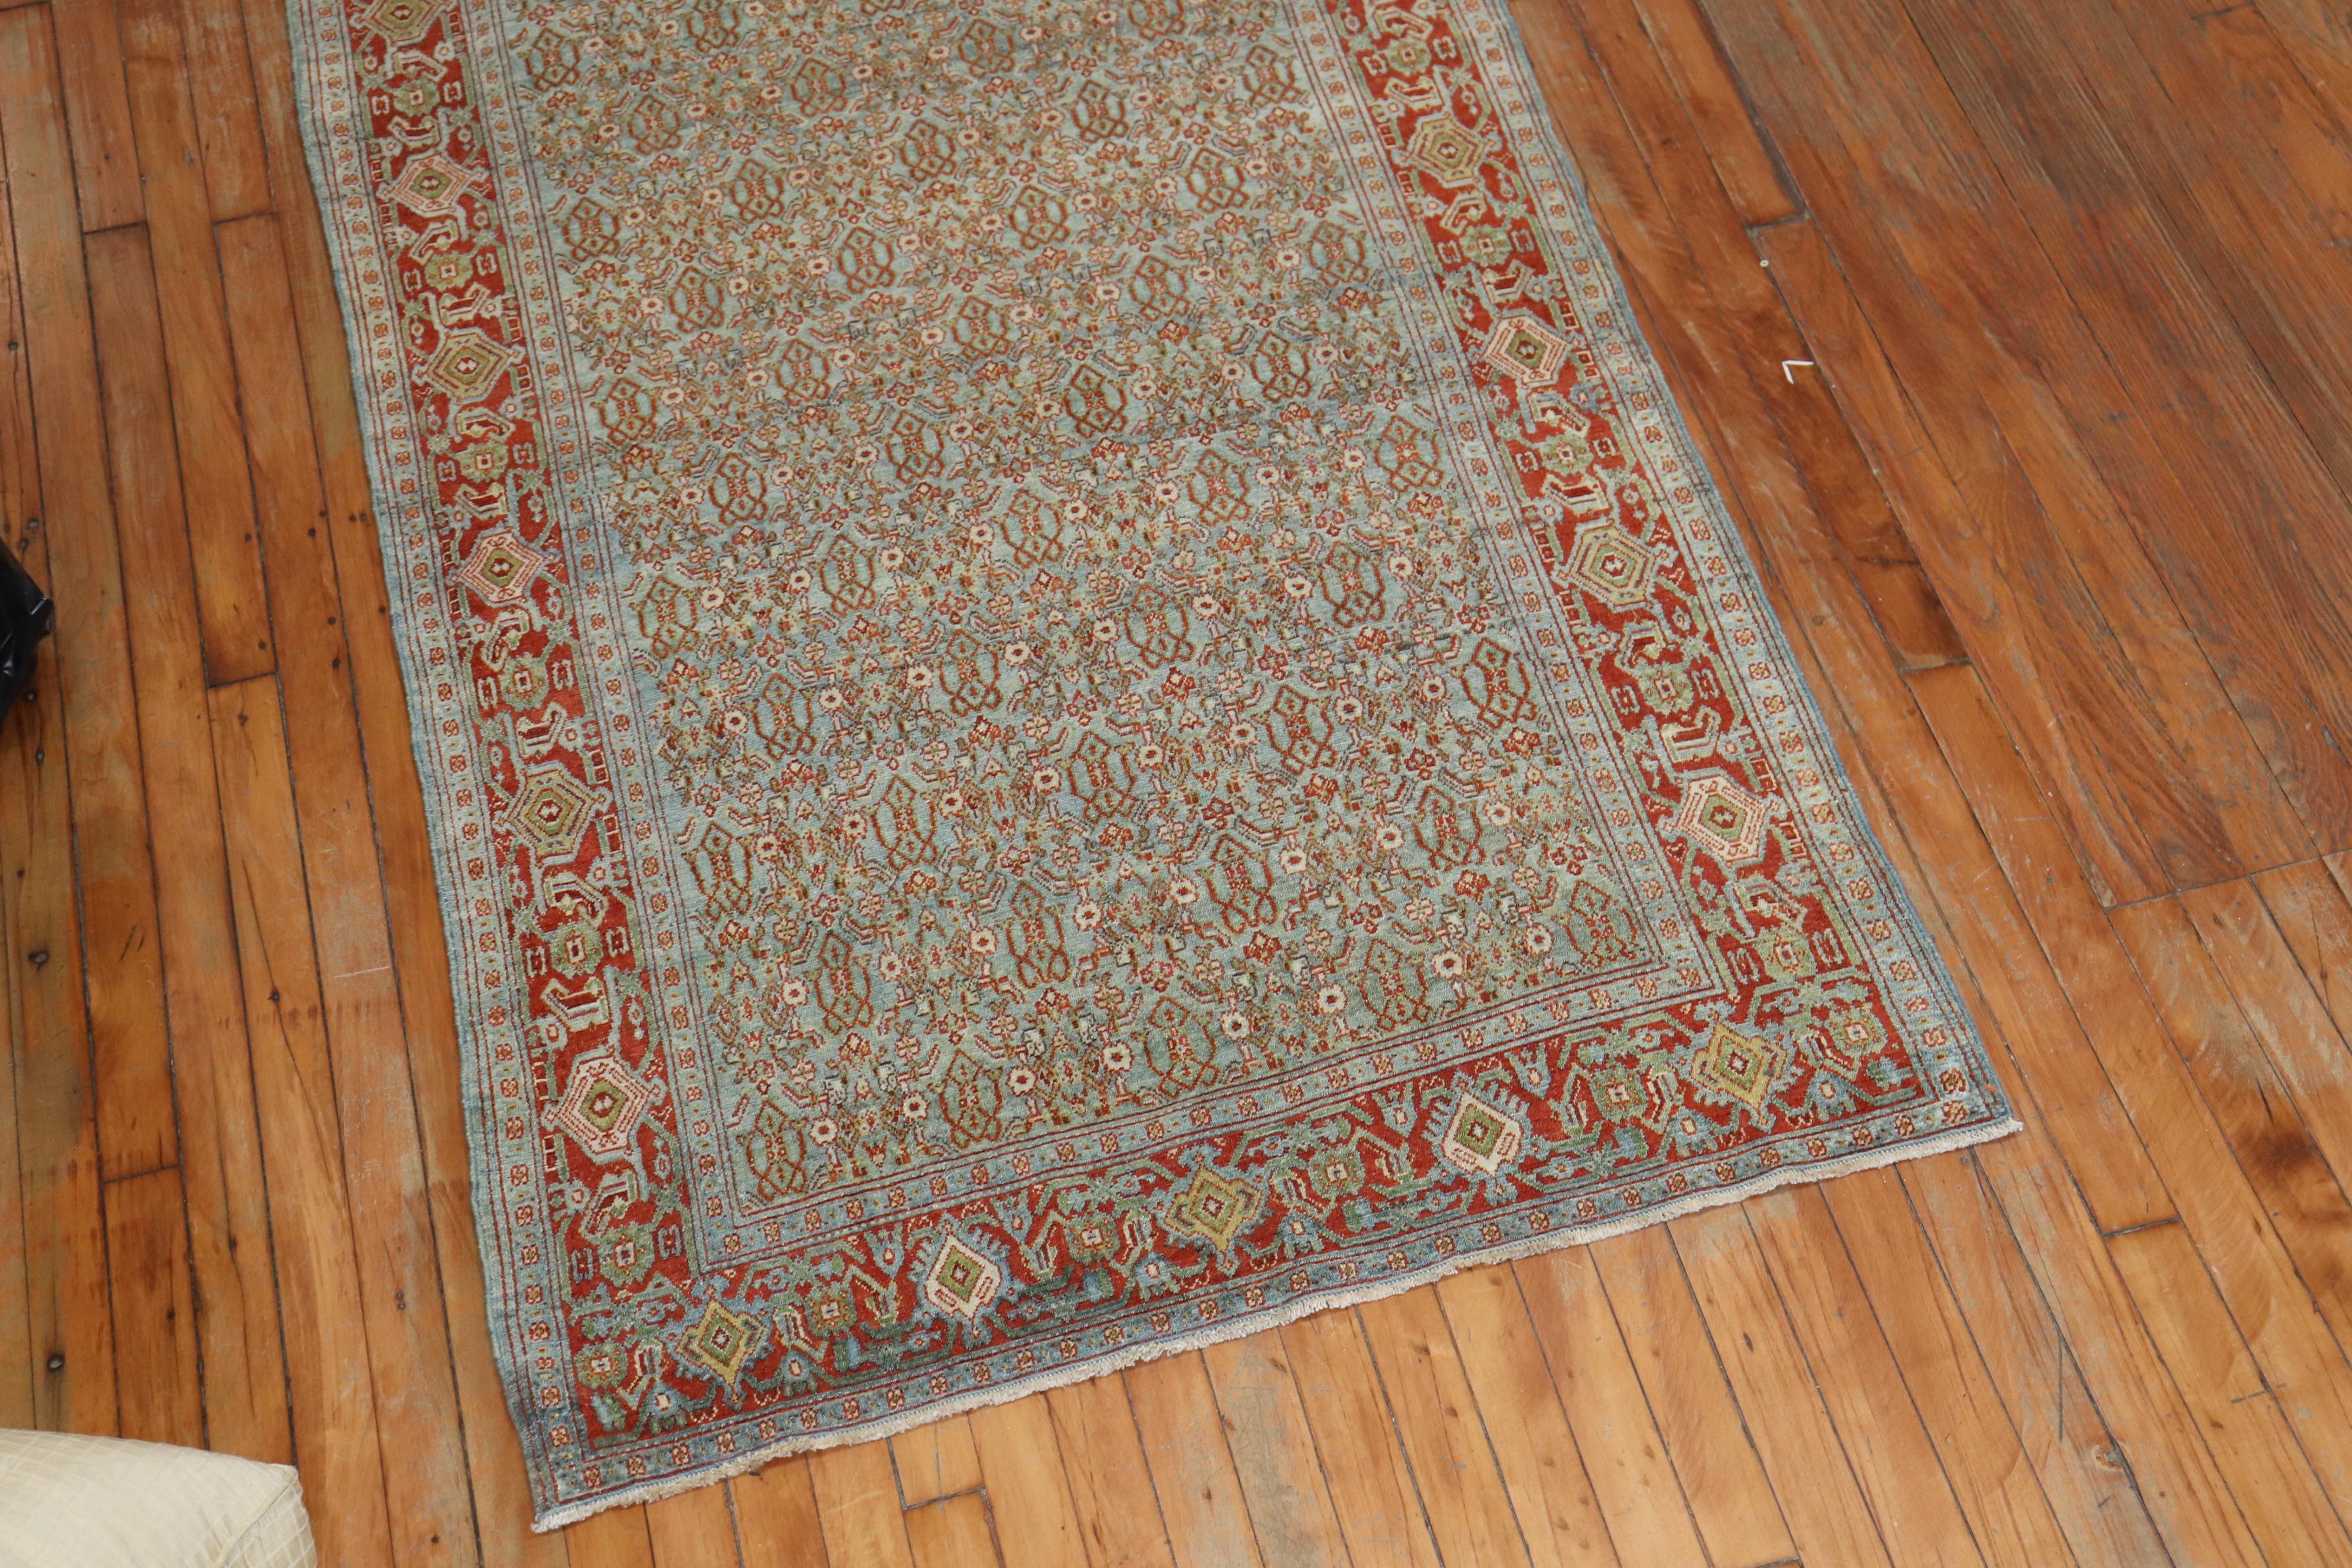 Fine quality slate blue field, red border Persian Senneh Runner. It has that repetitive Classic Herati design you see in most senneh rugs. The colors are dreamy, circa 1910.

Size: 3'7